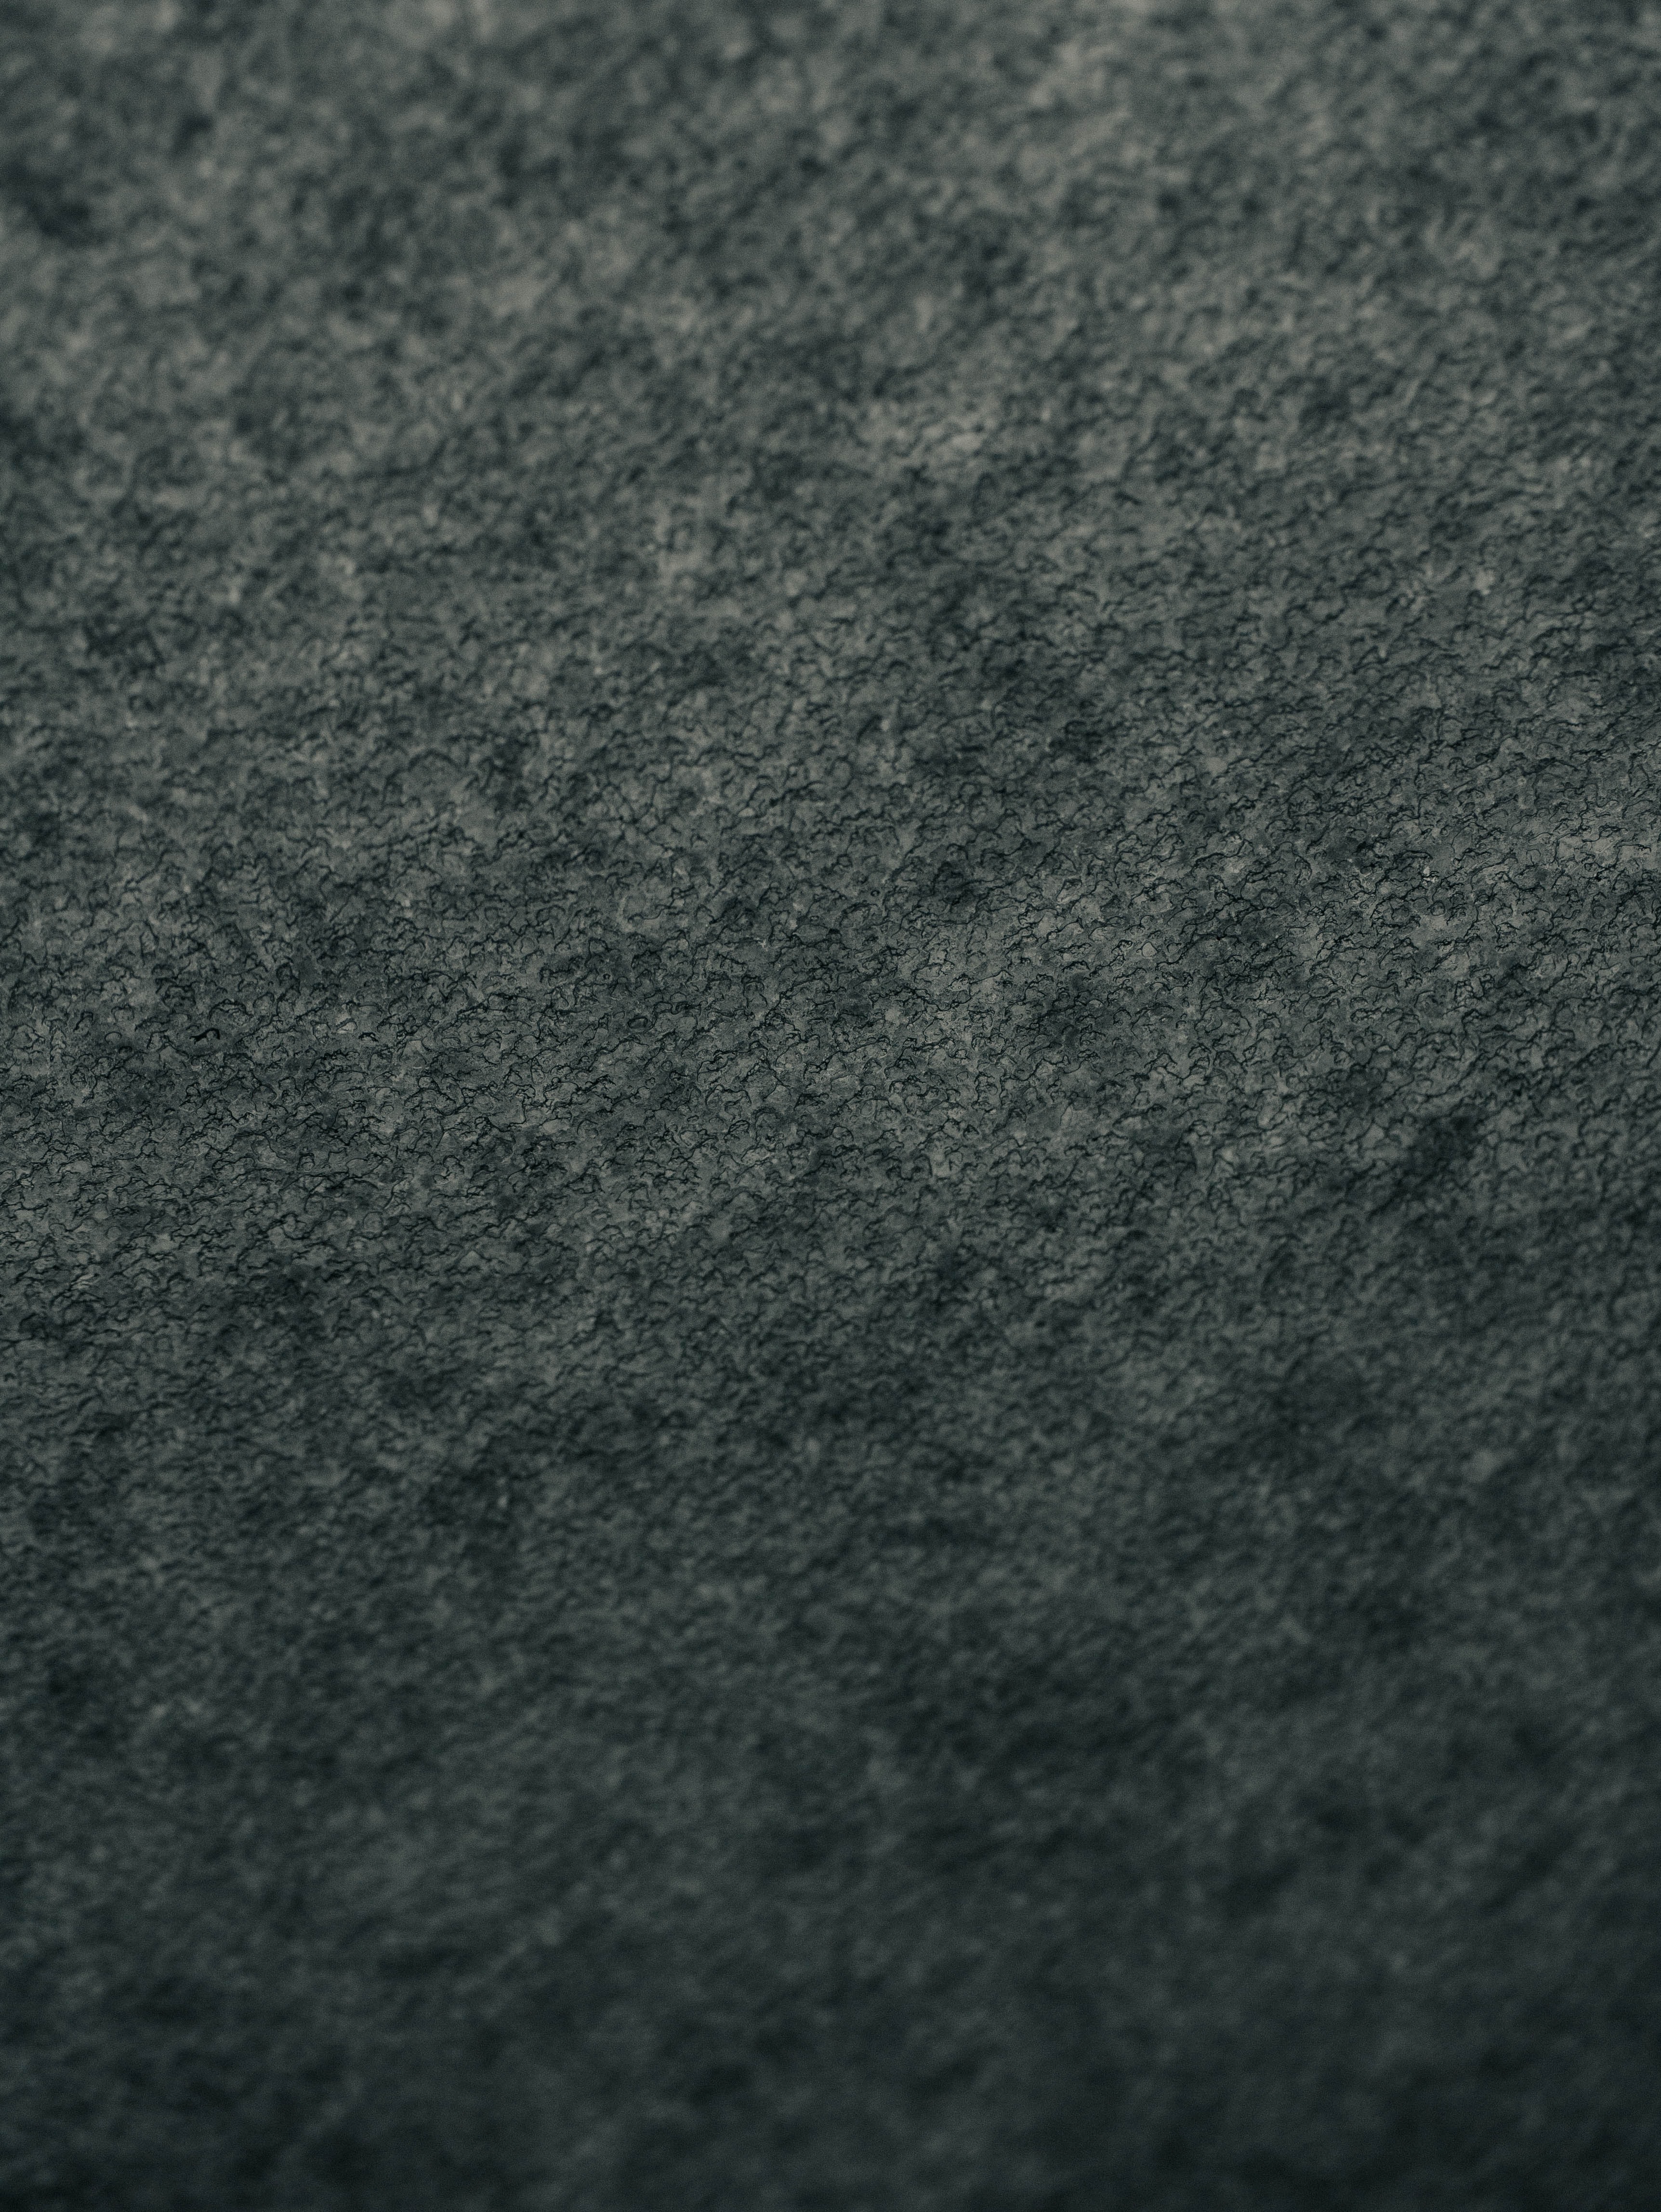 surface, texture, textures, relief, grey, rough, rugged Aesthetic wallpaper